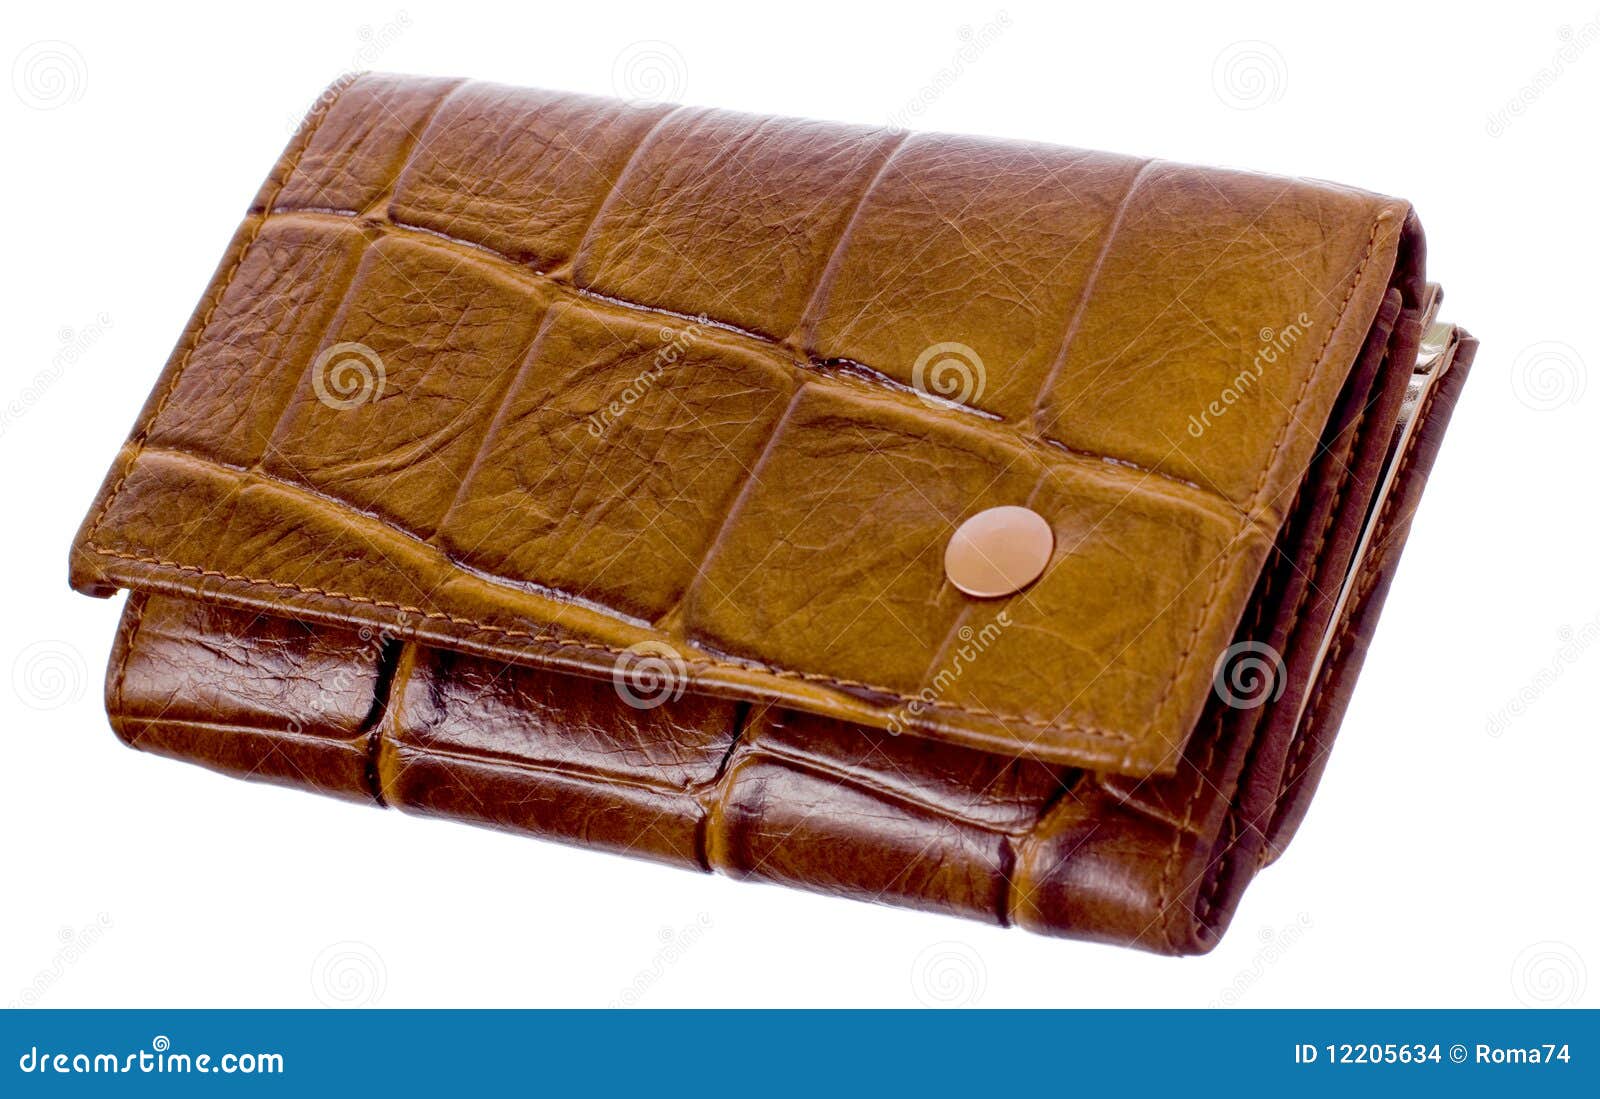 Bulging purse stock photo. Image of white, collector - 12205634